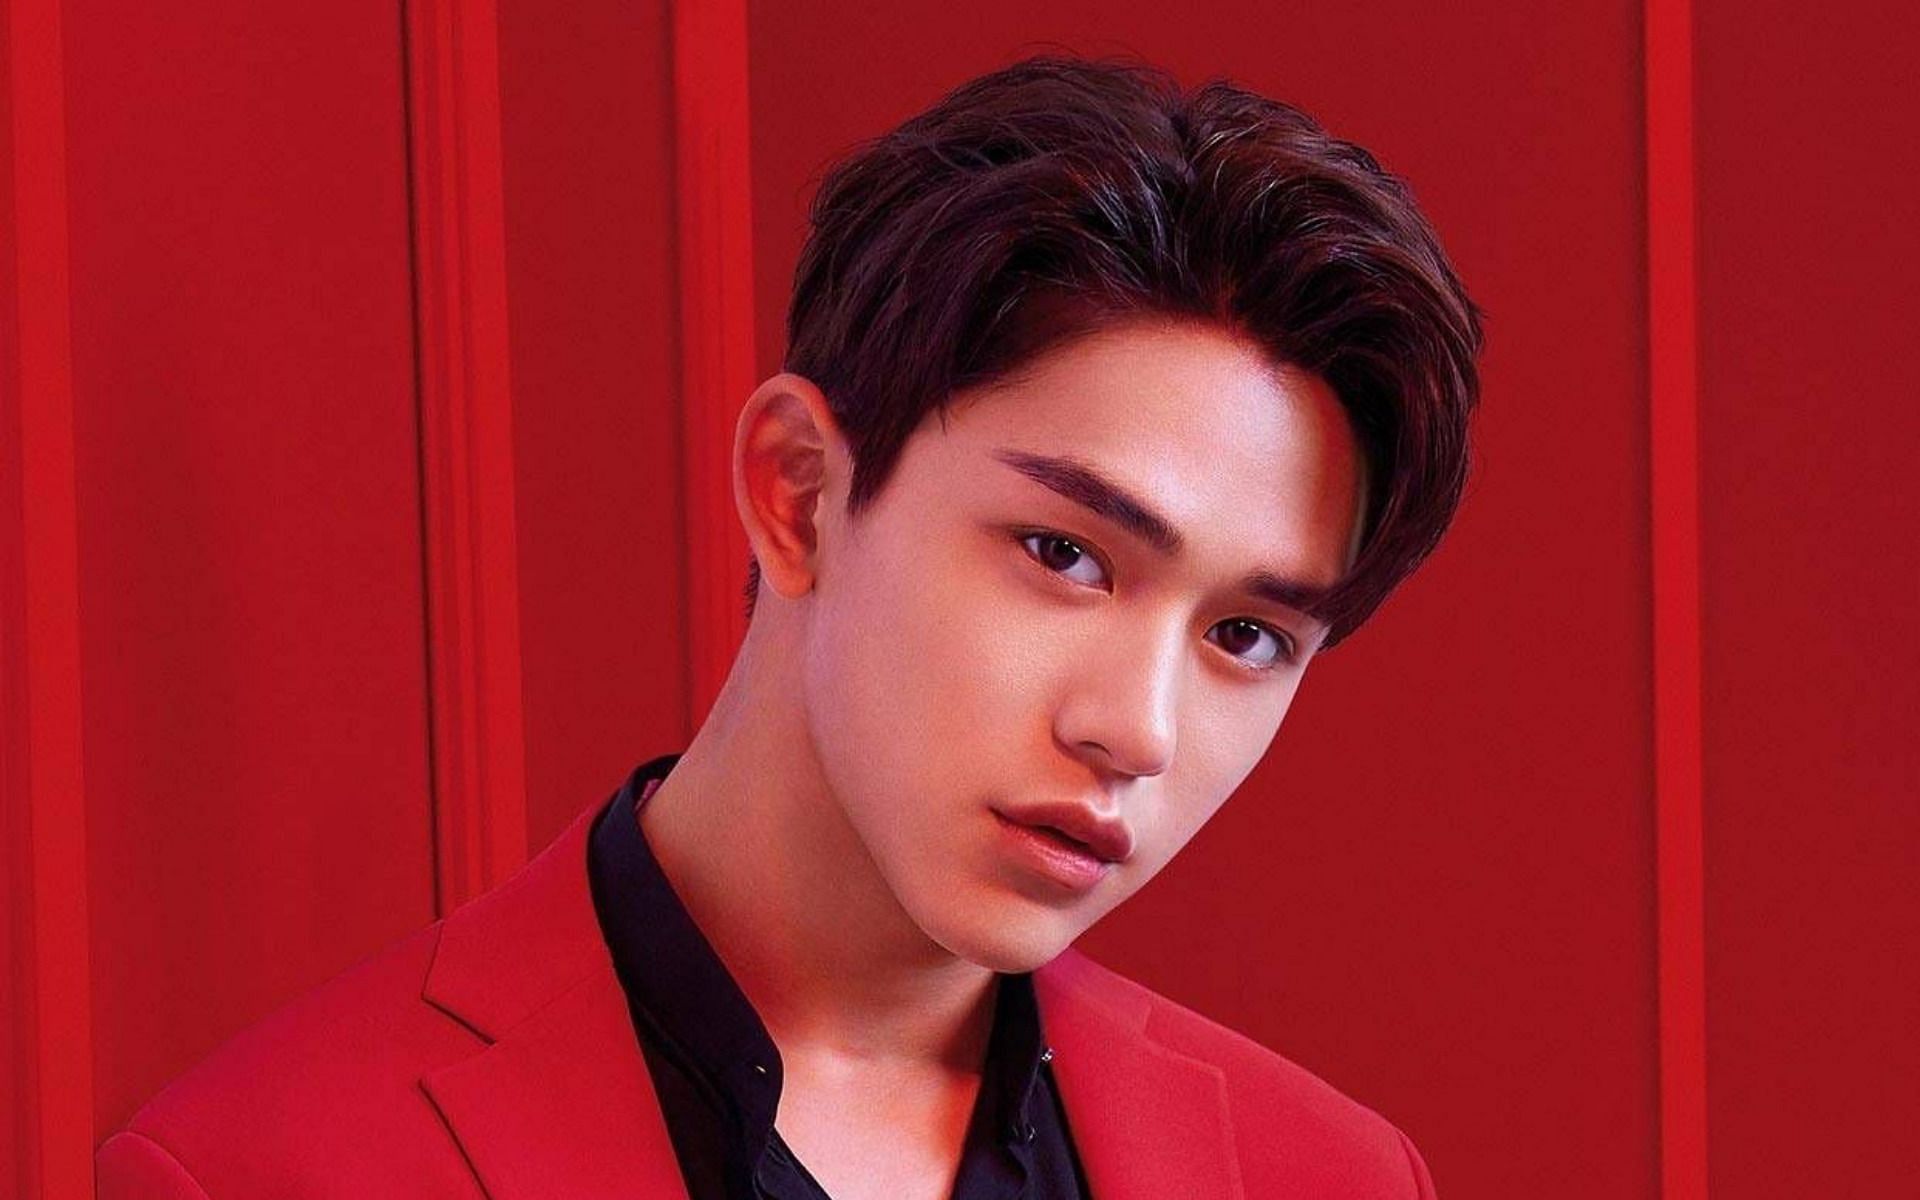 NCT&#039;s Lucas excluded from latest merch release, which worries fans (Image via SM Entertainment)